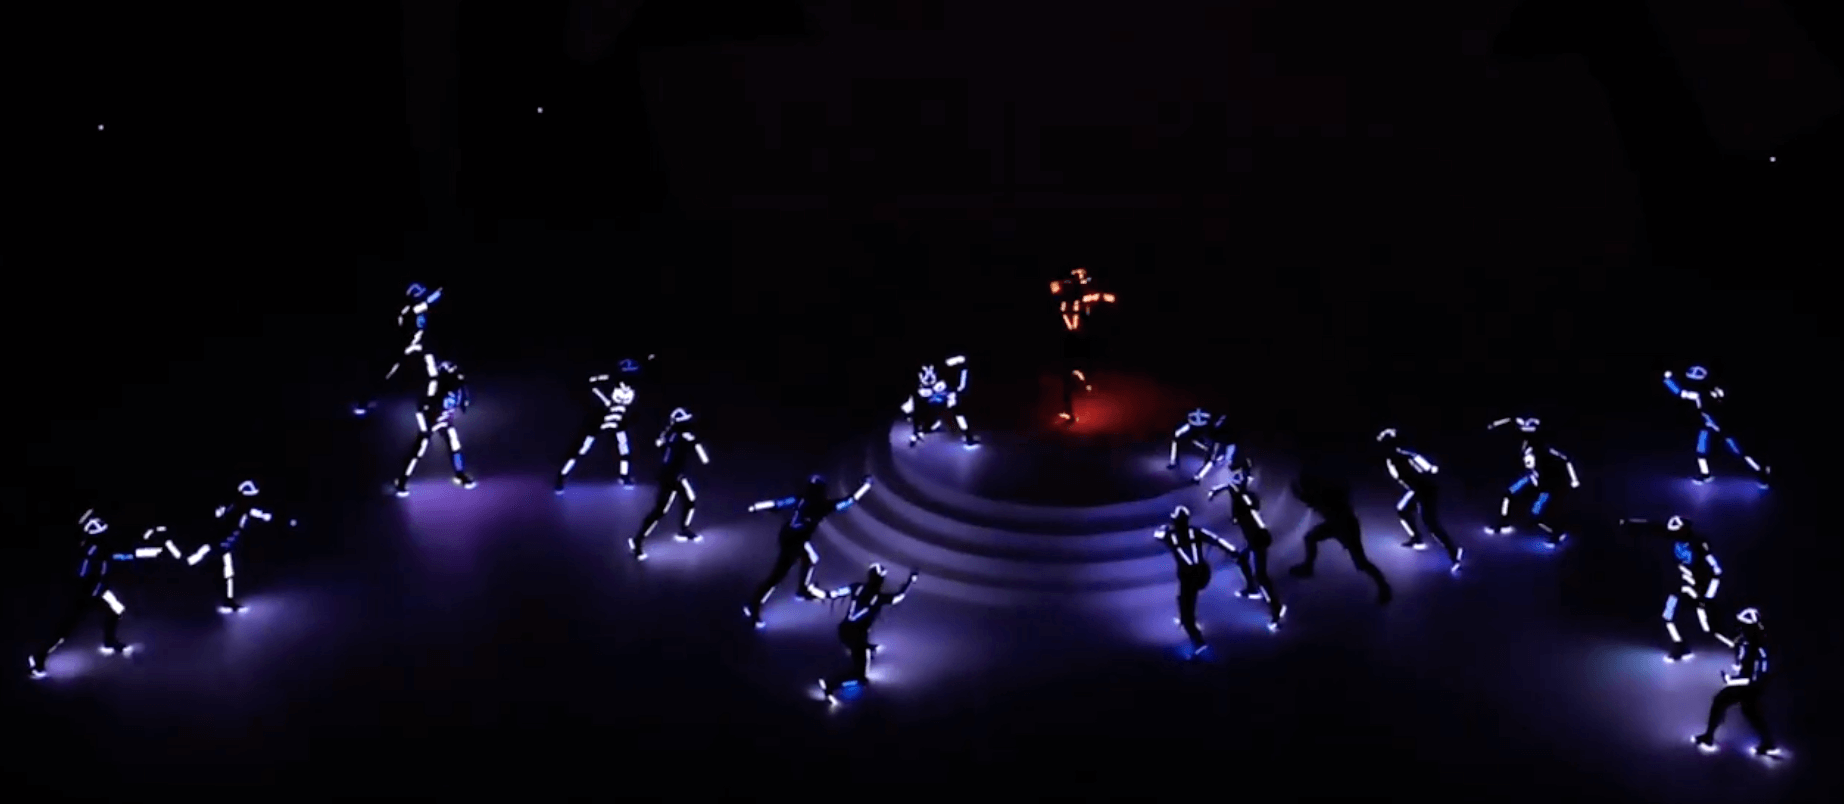 Tron DANCE Projection Dance Choreography. One of the 1st dance troup